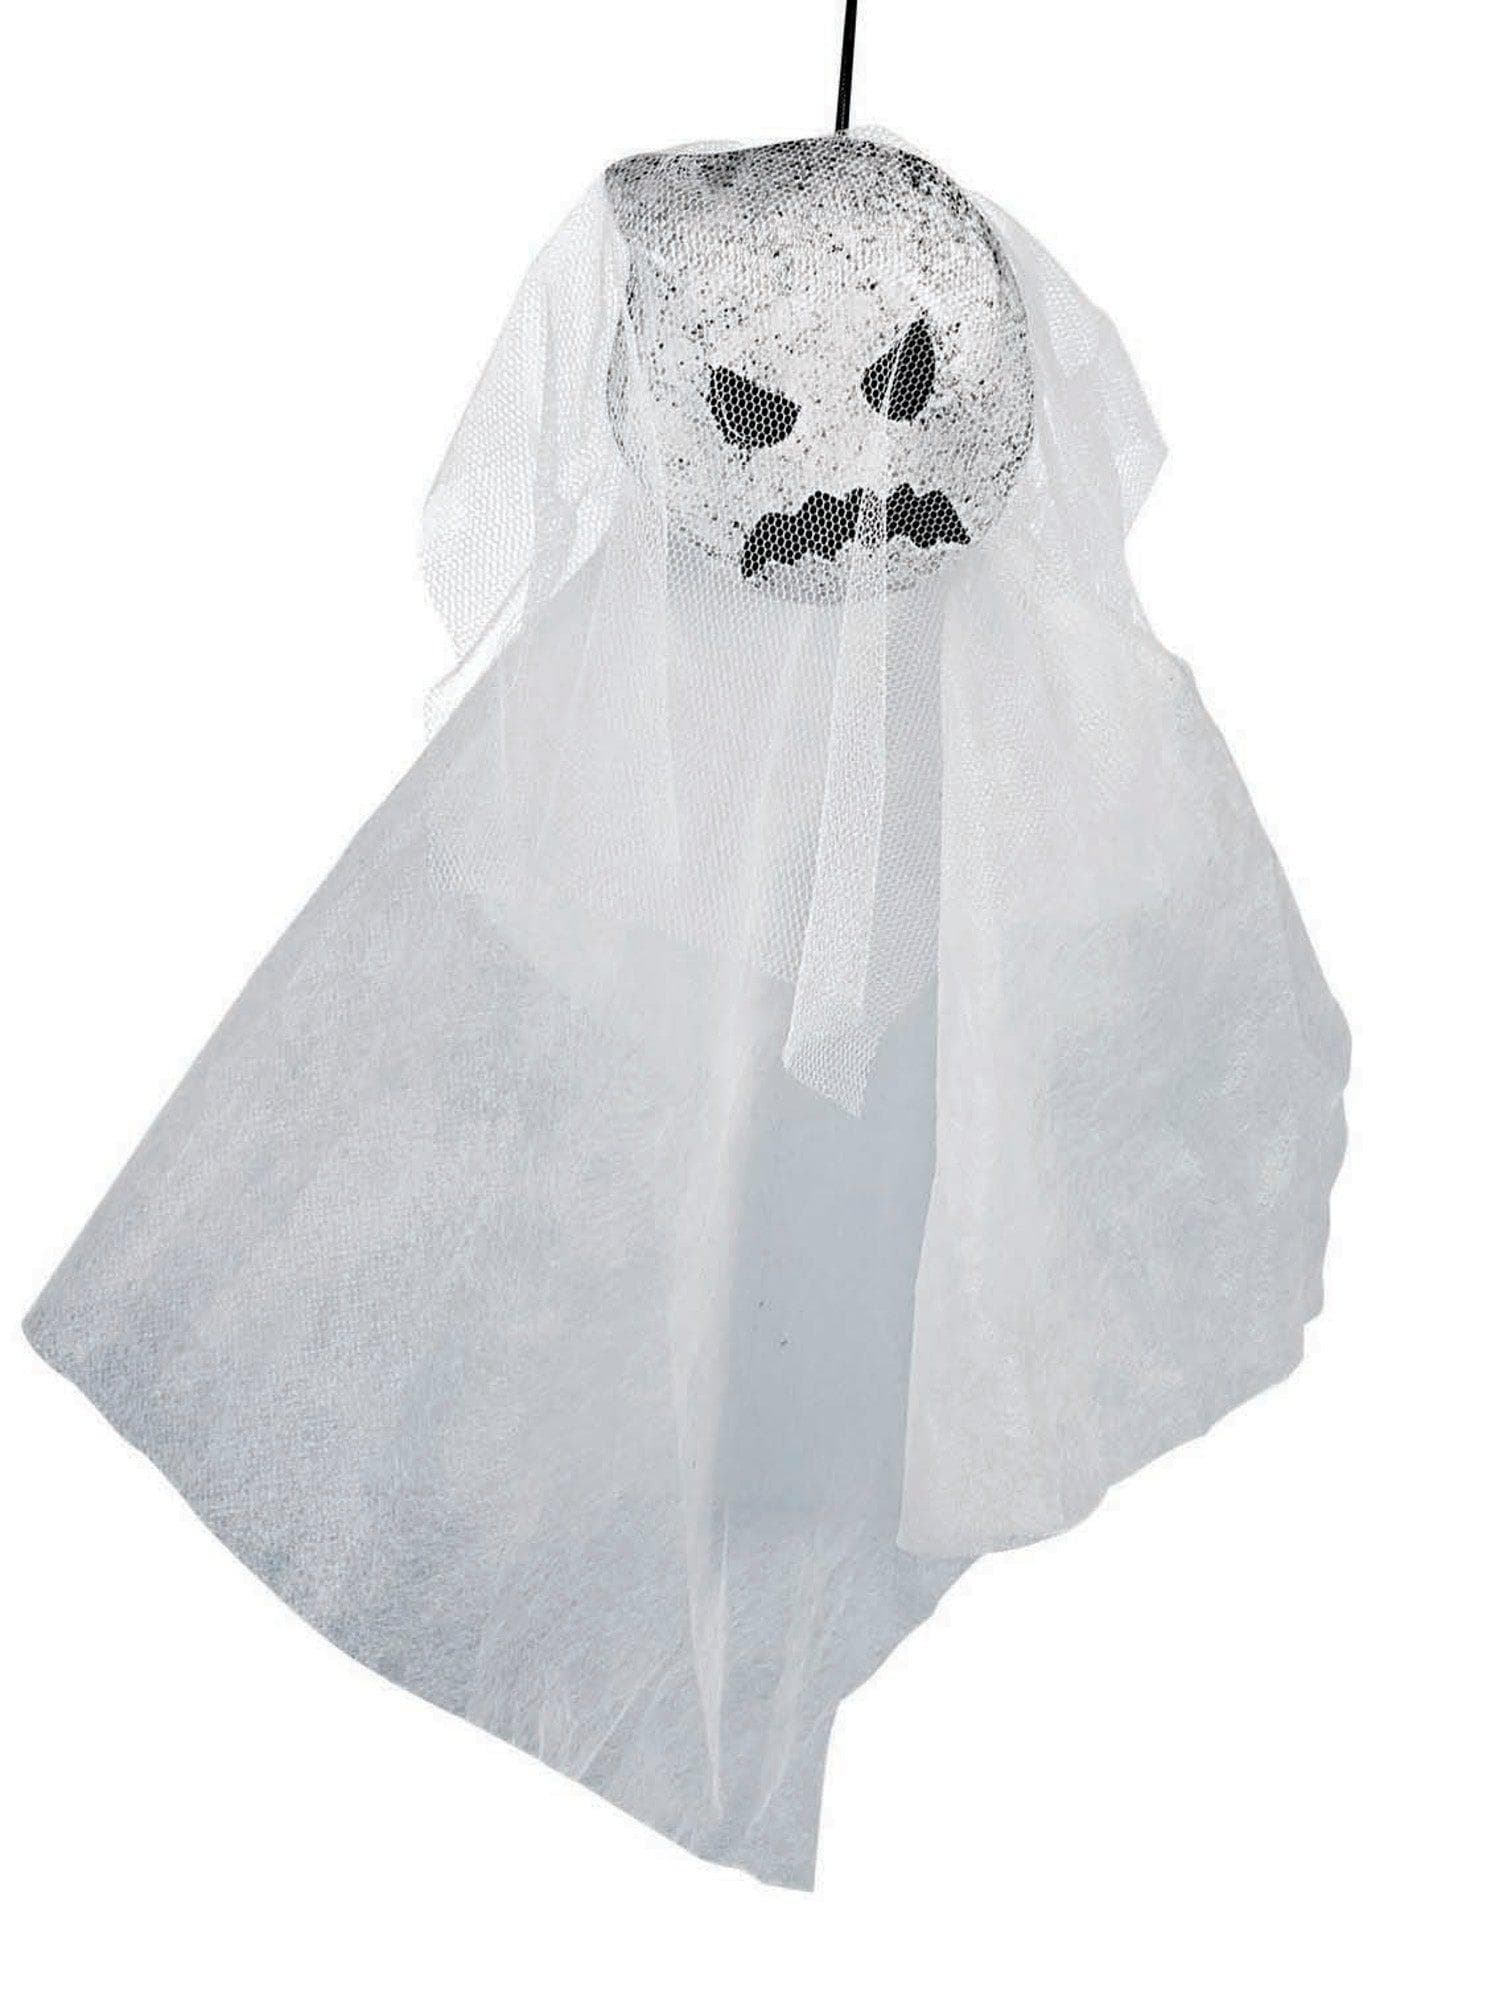 12-inch White Ghost Hanging Decoration - costumes.com